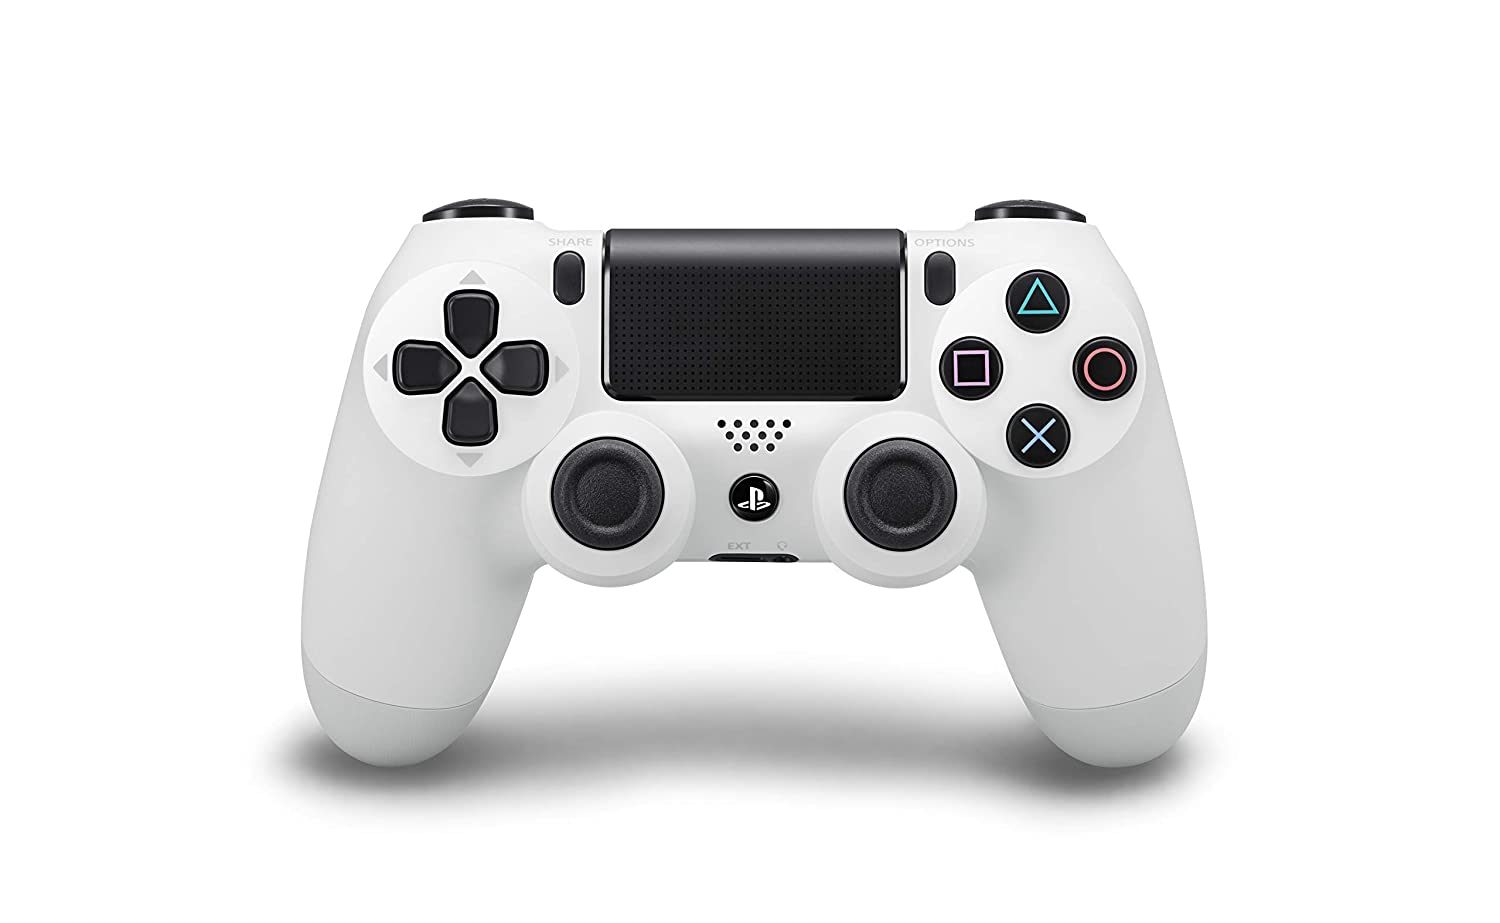 Sony Playstation wireless Dual Shock 4 Controller for PS4 - Glacier White